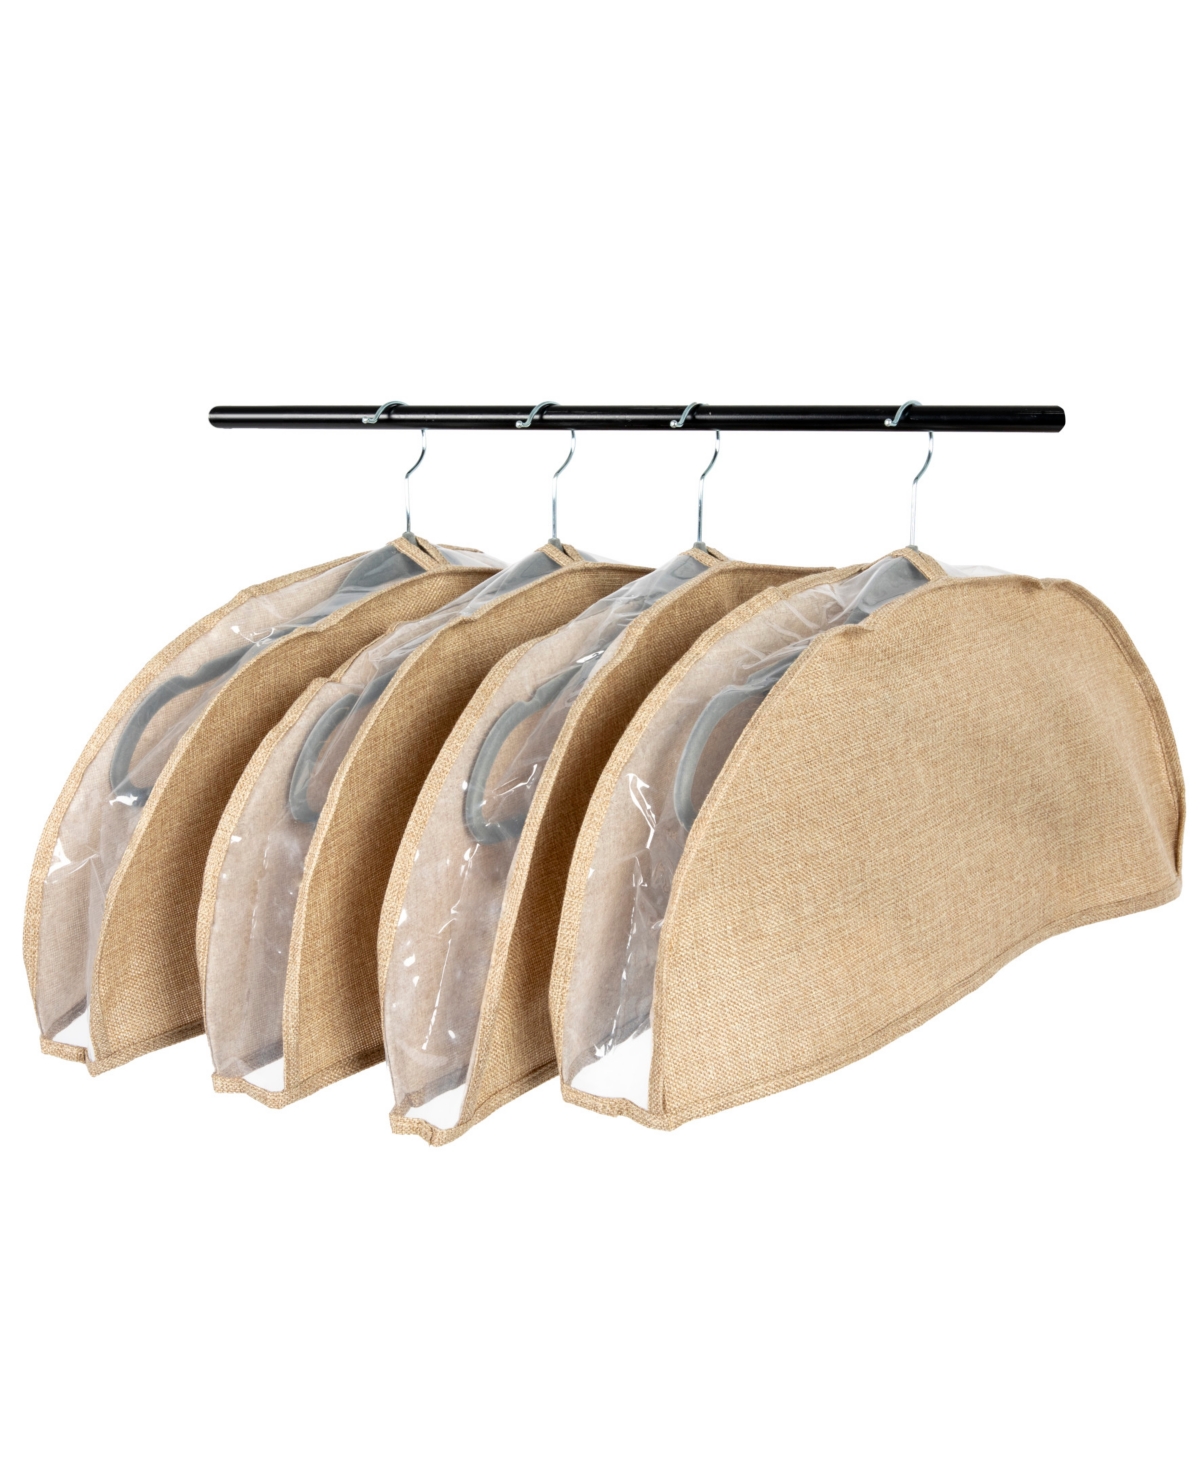 Household Essentials Hanging Garment Shoulder Dust Covers For Closet, Set Of 4 In Beige